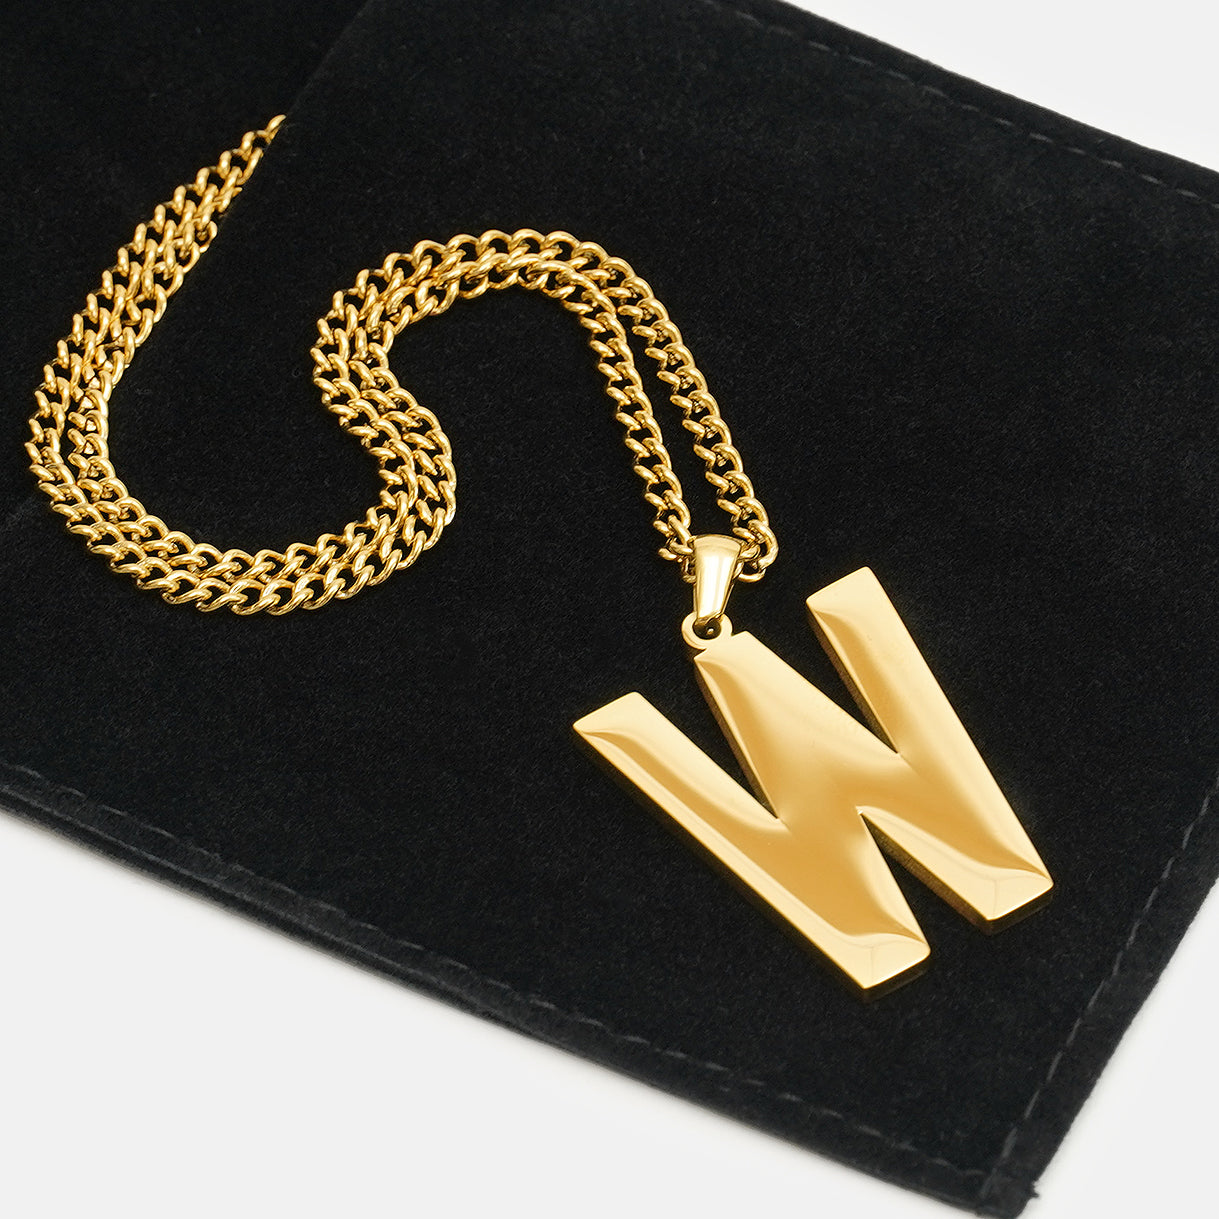 W Letter Pendant with Chain Kids Necklace - Gold Plated Stainless Steel